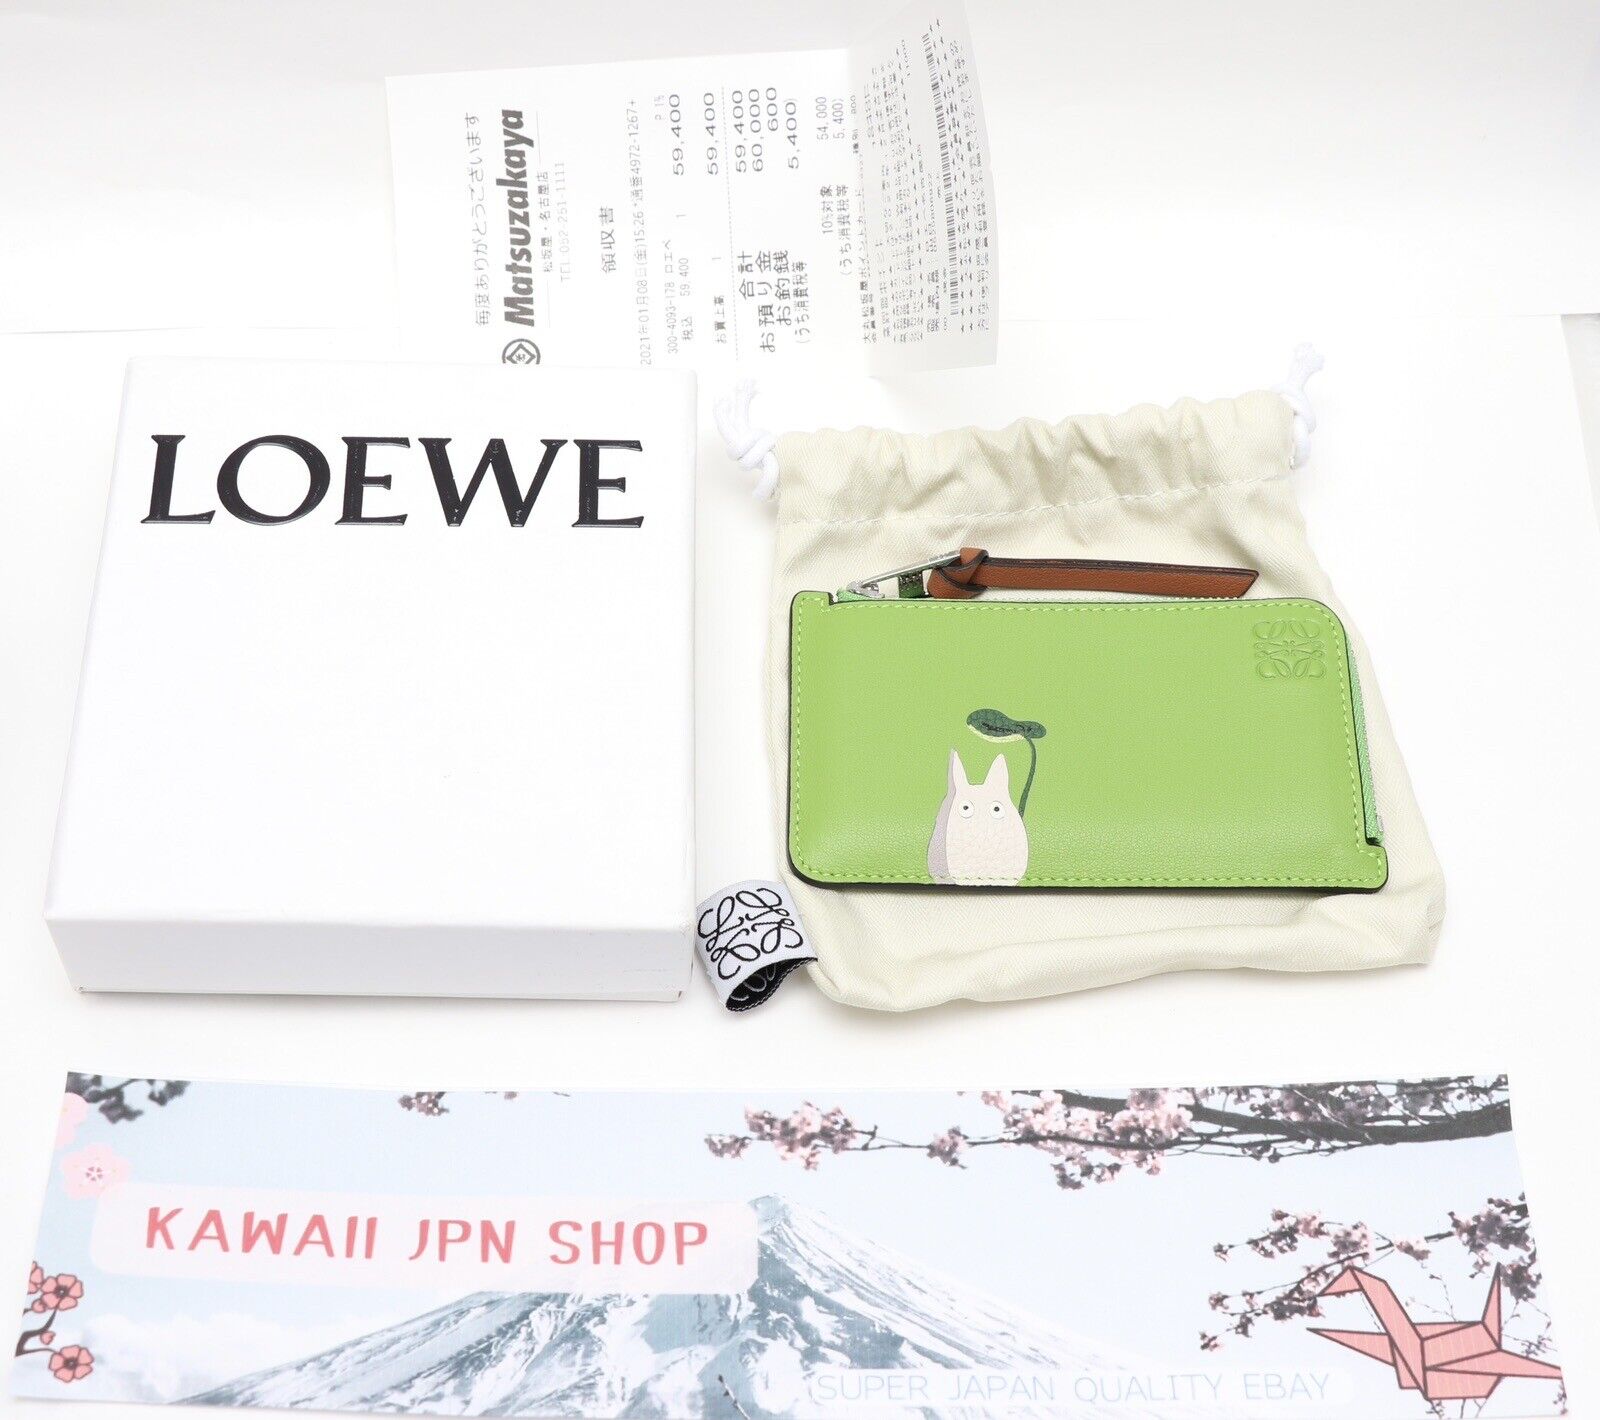 LOEWE Totoro collaboration limited card holder with box, storage bag gift